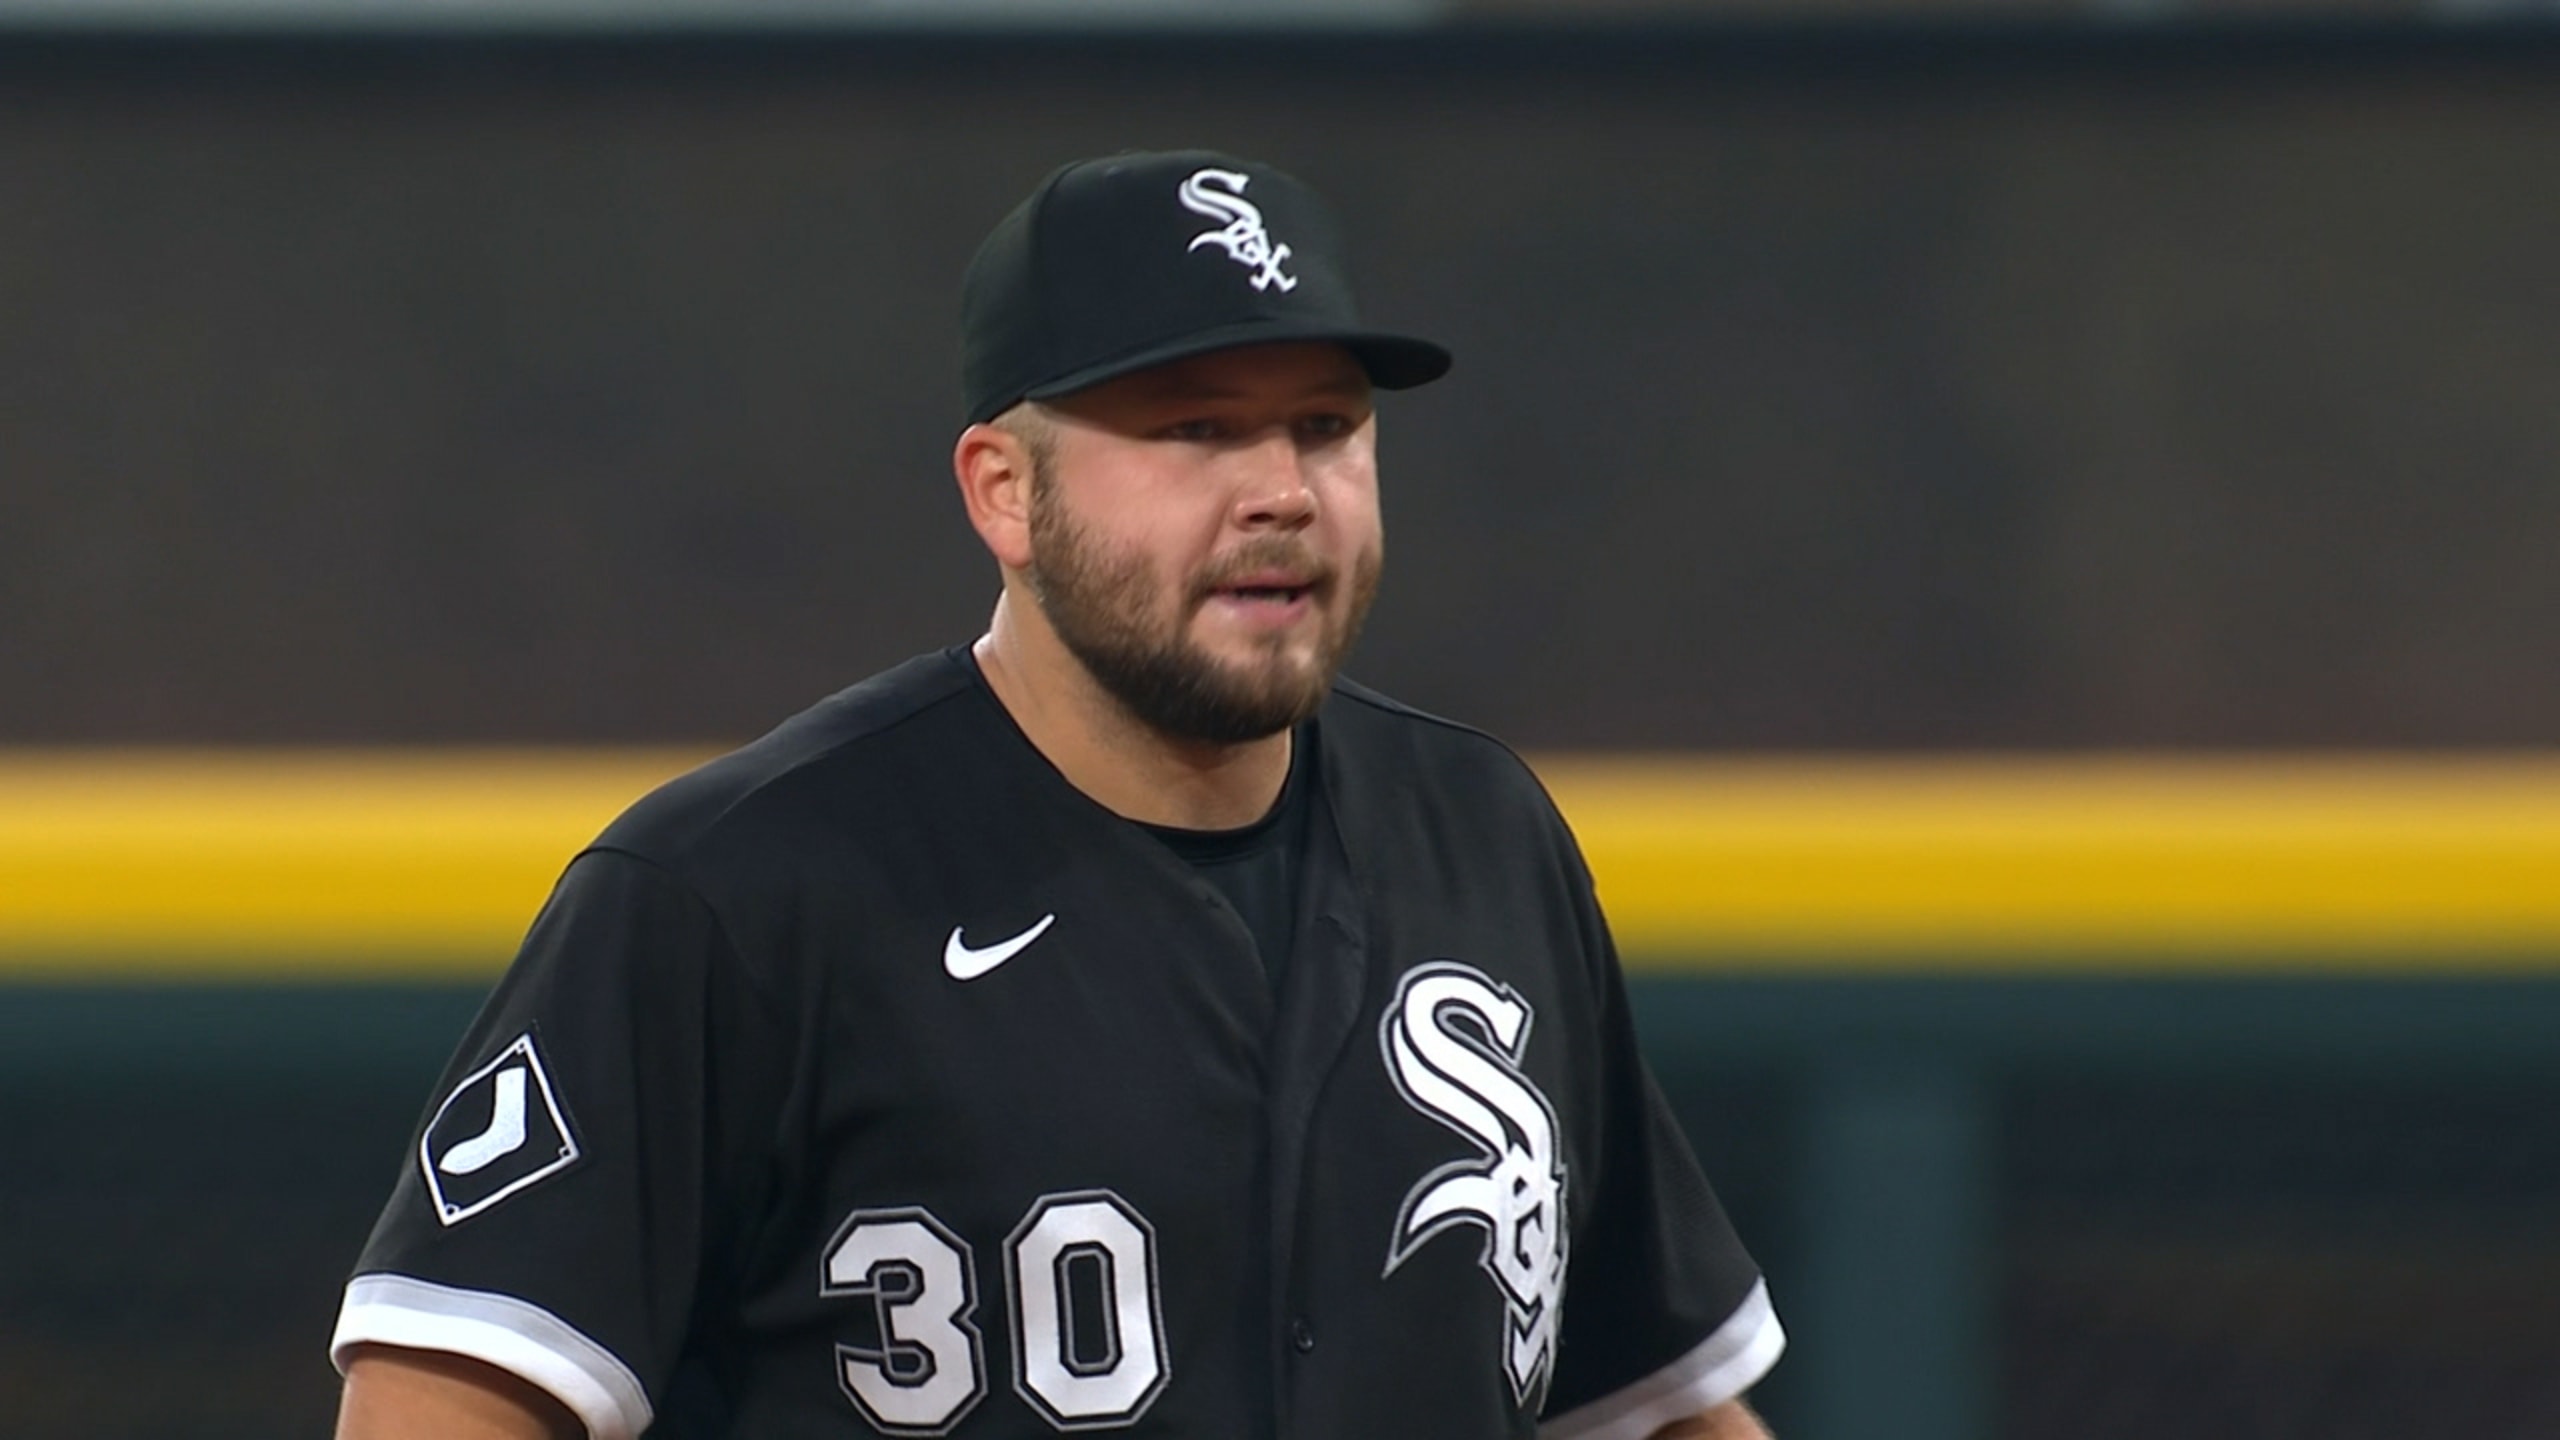 The White Sox weren't looking to trade Jake Burger. Here's why Rick Hahn  made the deal